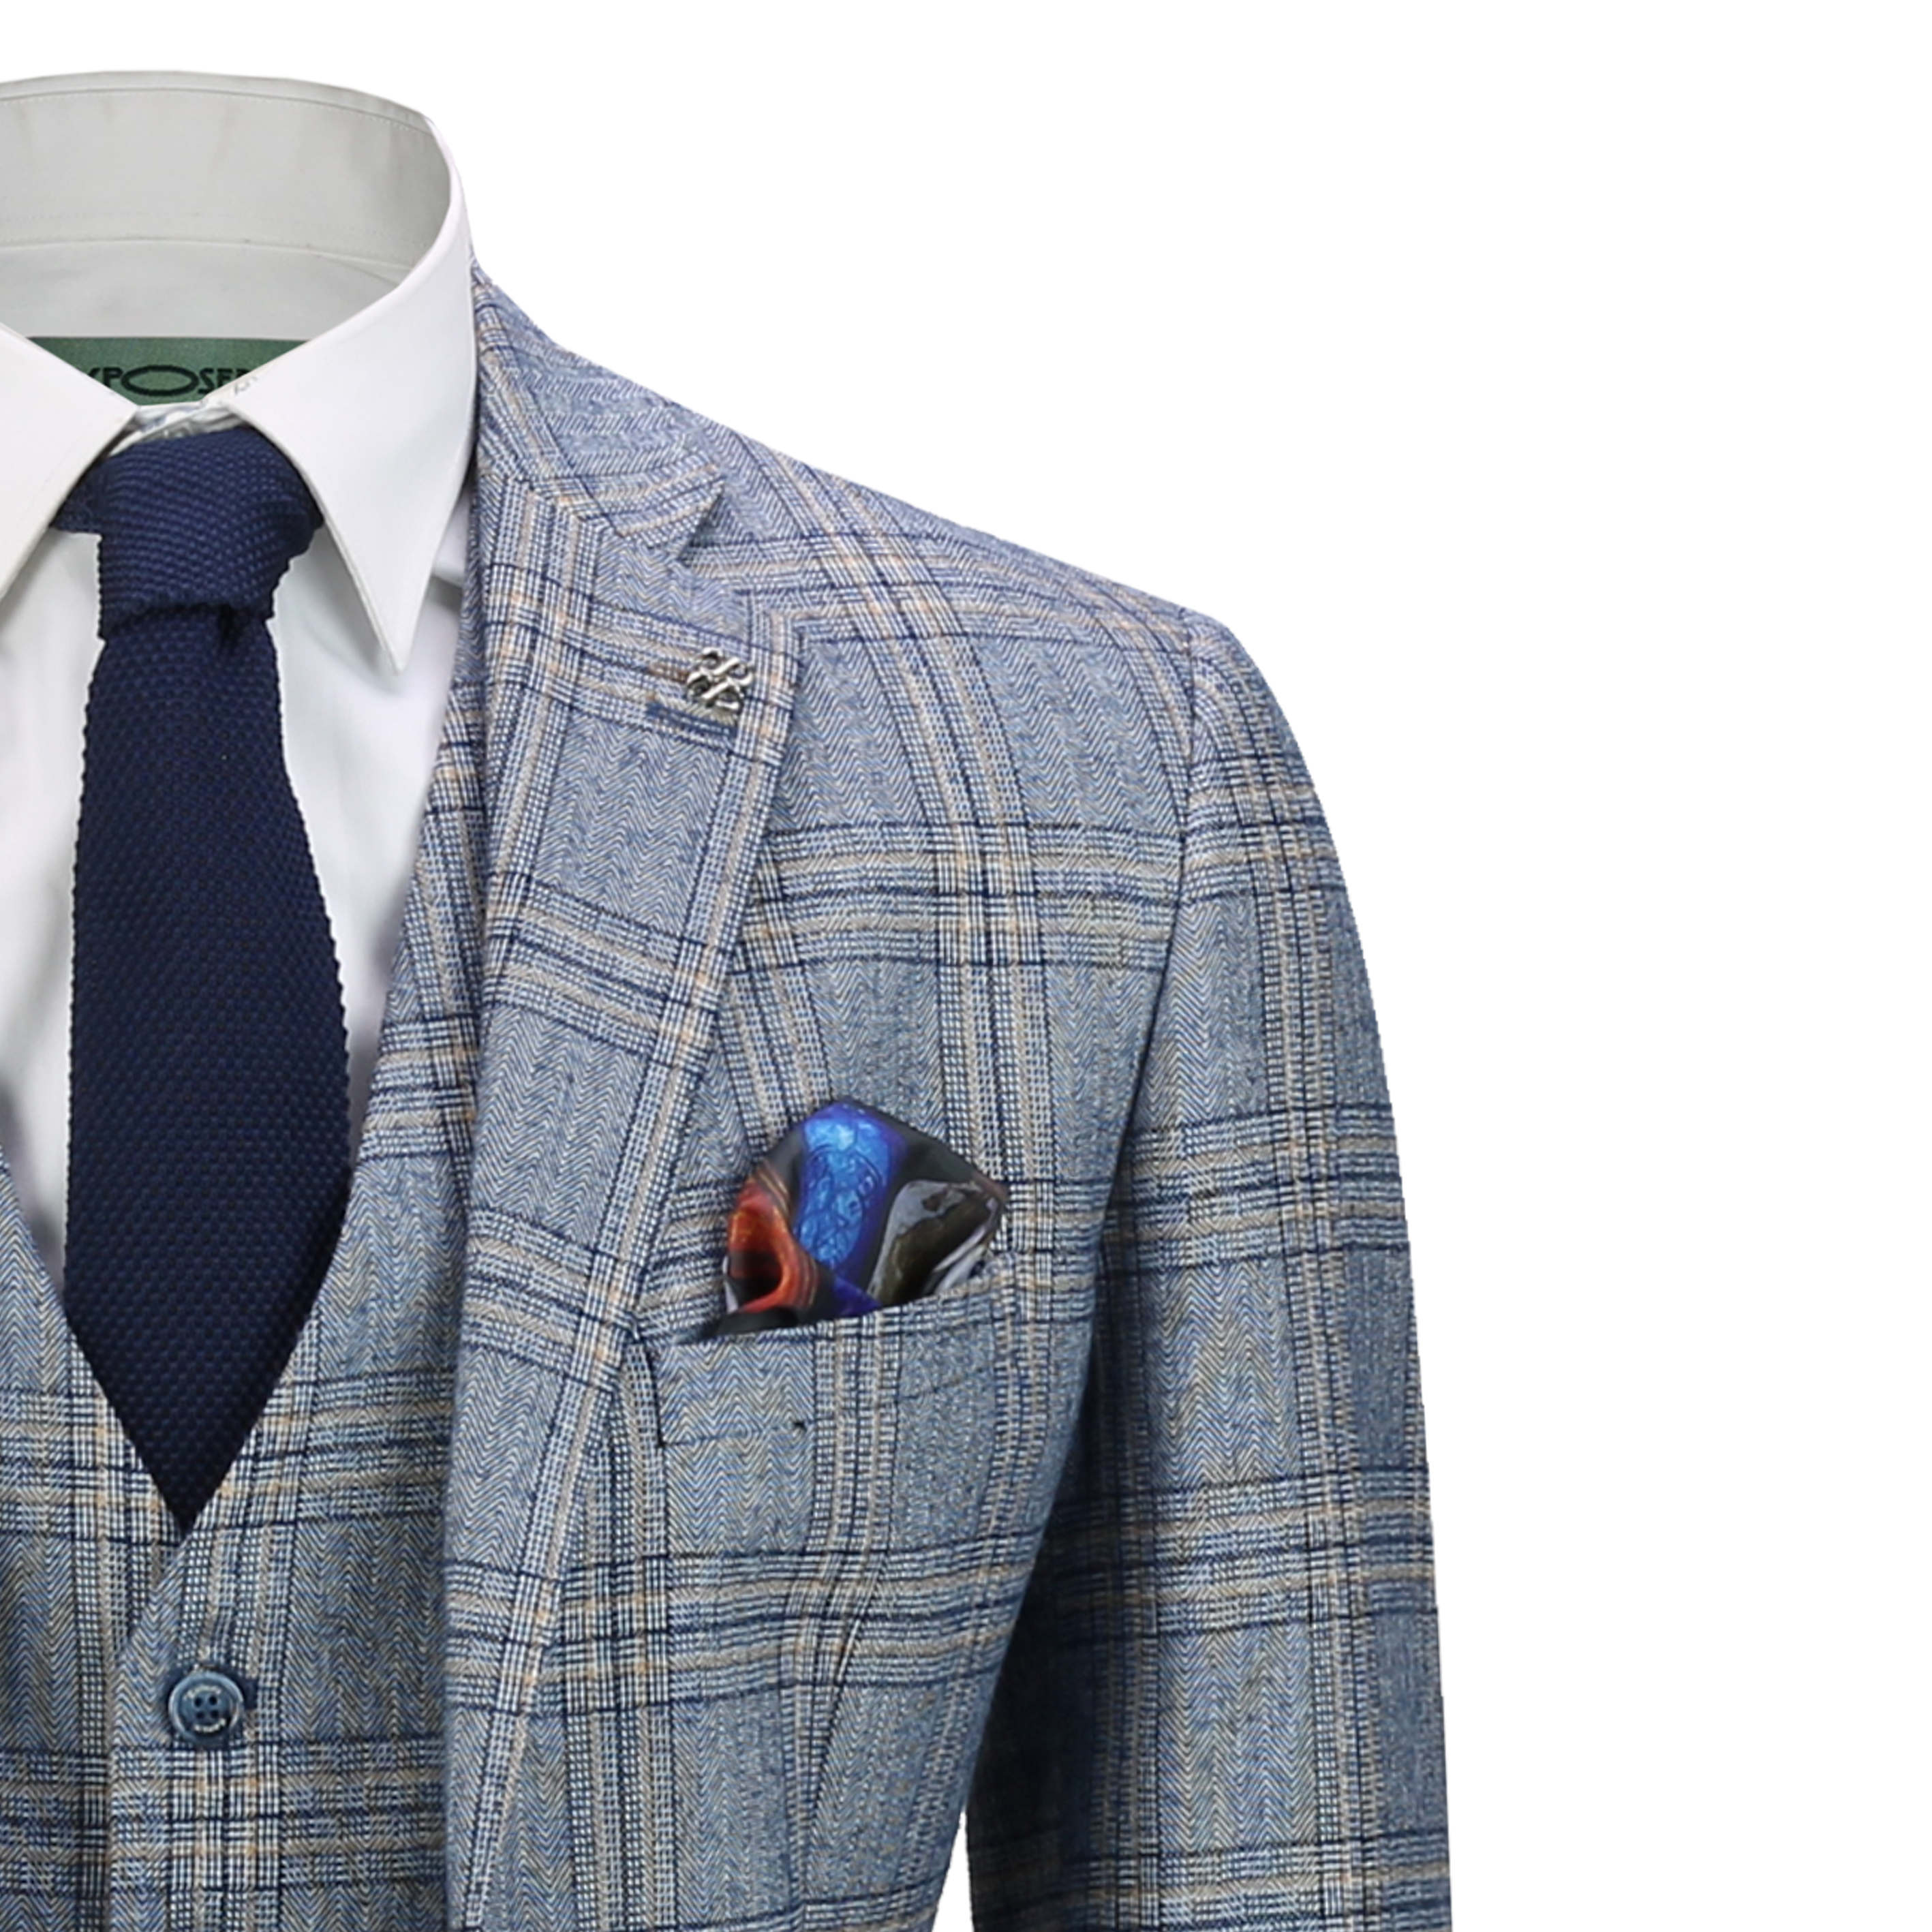 Mens Retro Vintage Blue Yellow Grid Check 3 Piece Tweed Suit Smart Tailored Fit 